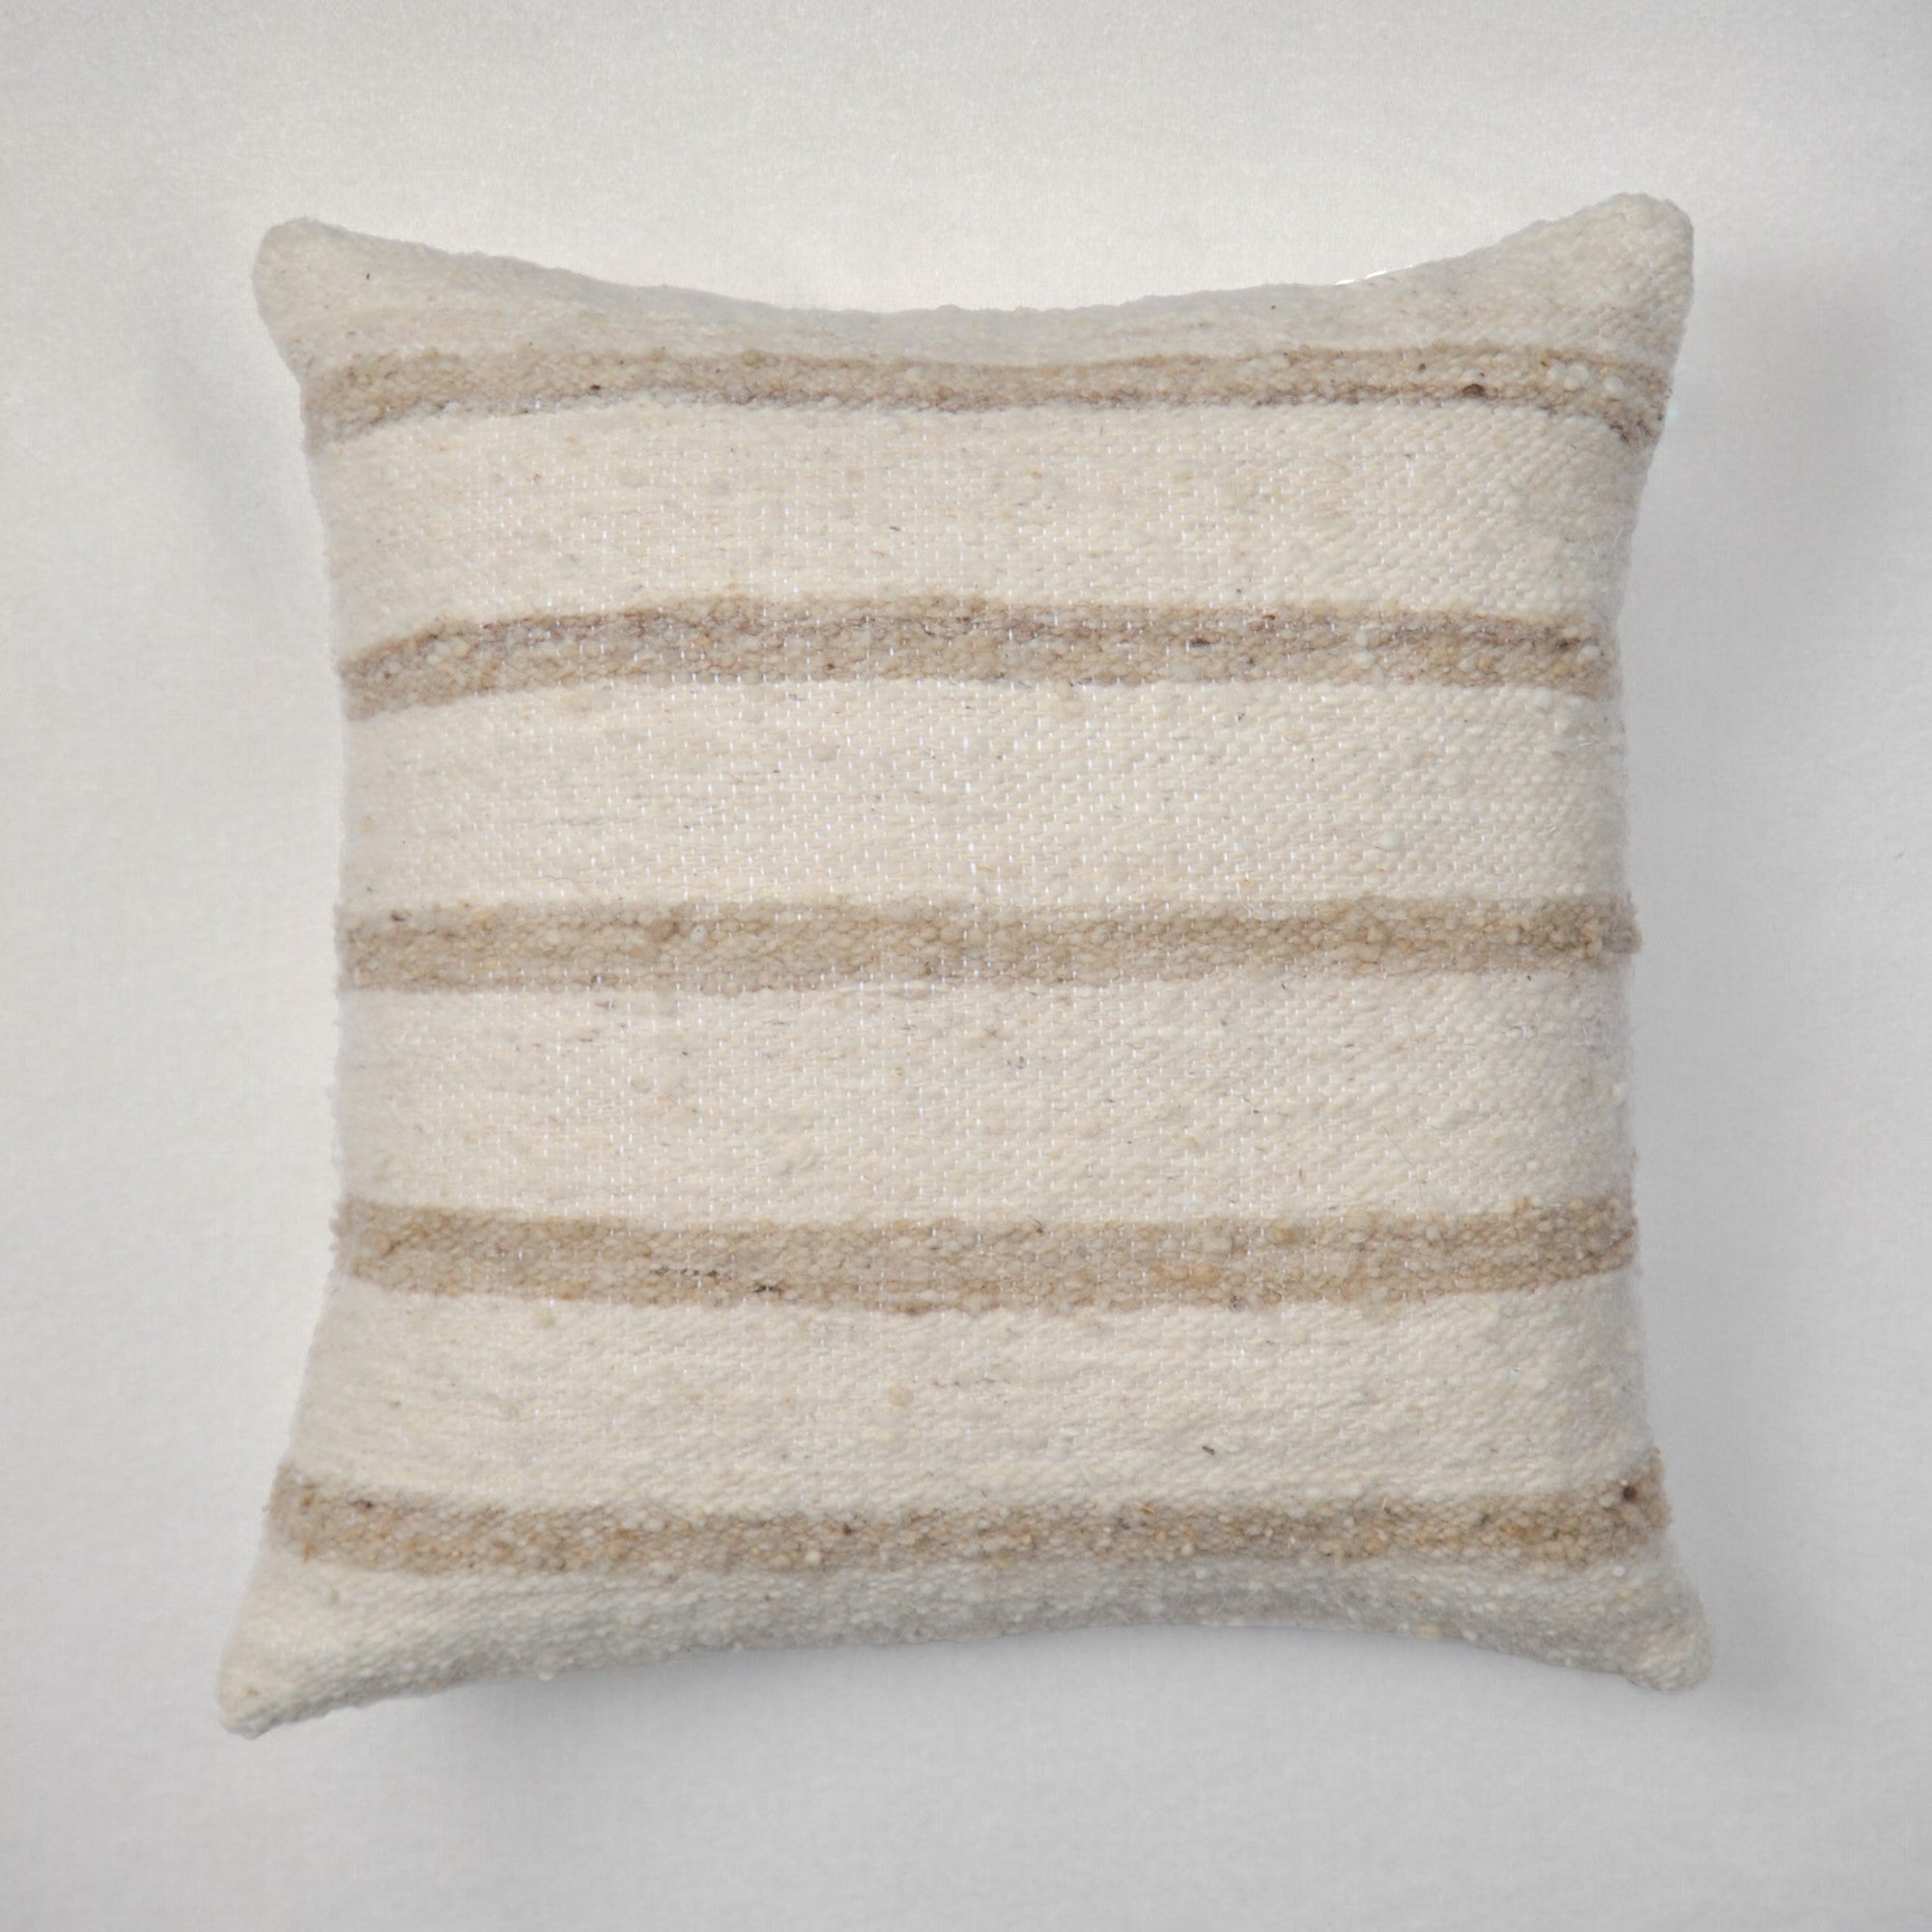 Linear Wool Pillow Covers by Diego Olivero Studio